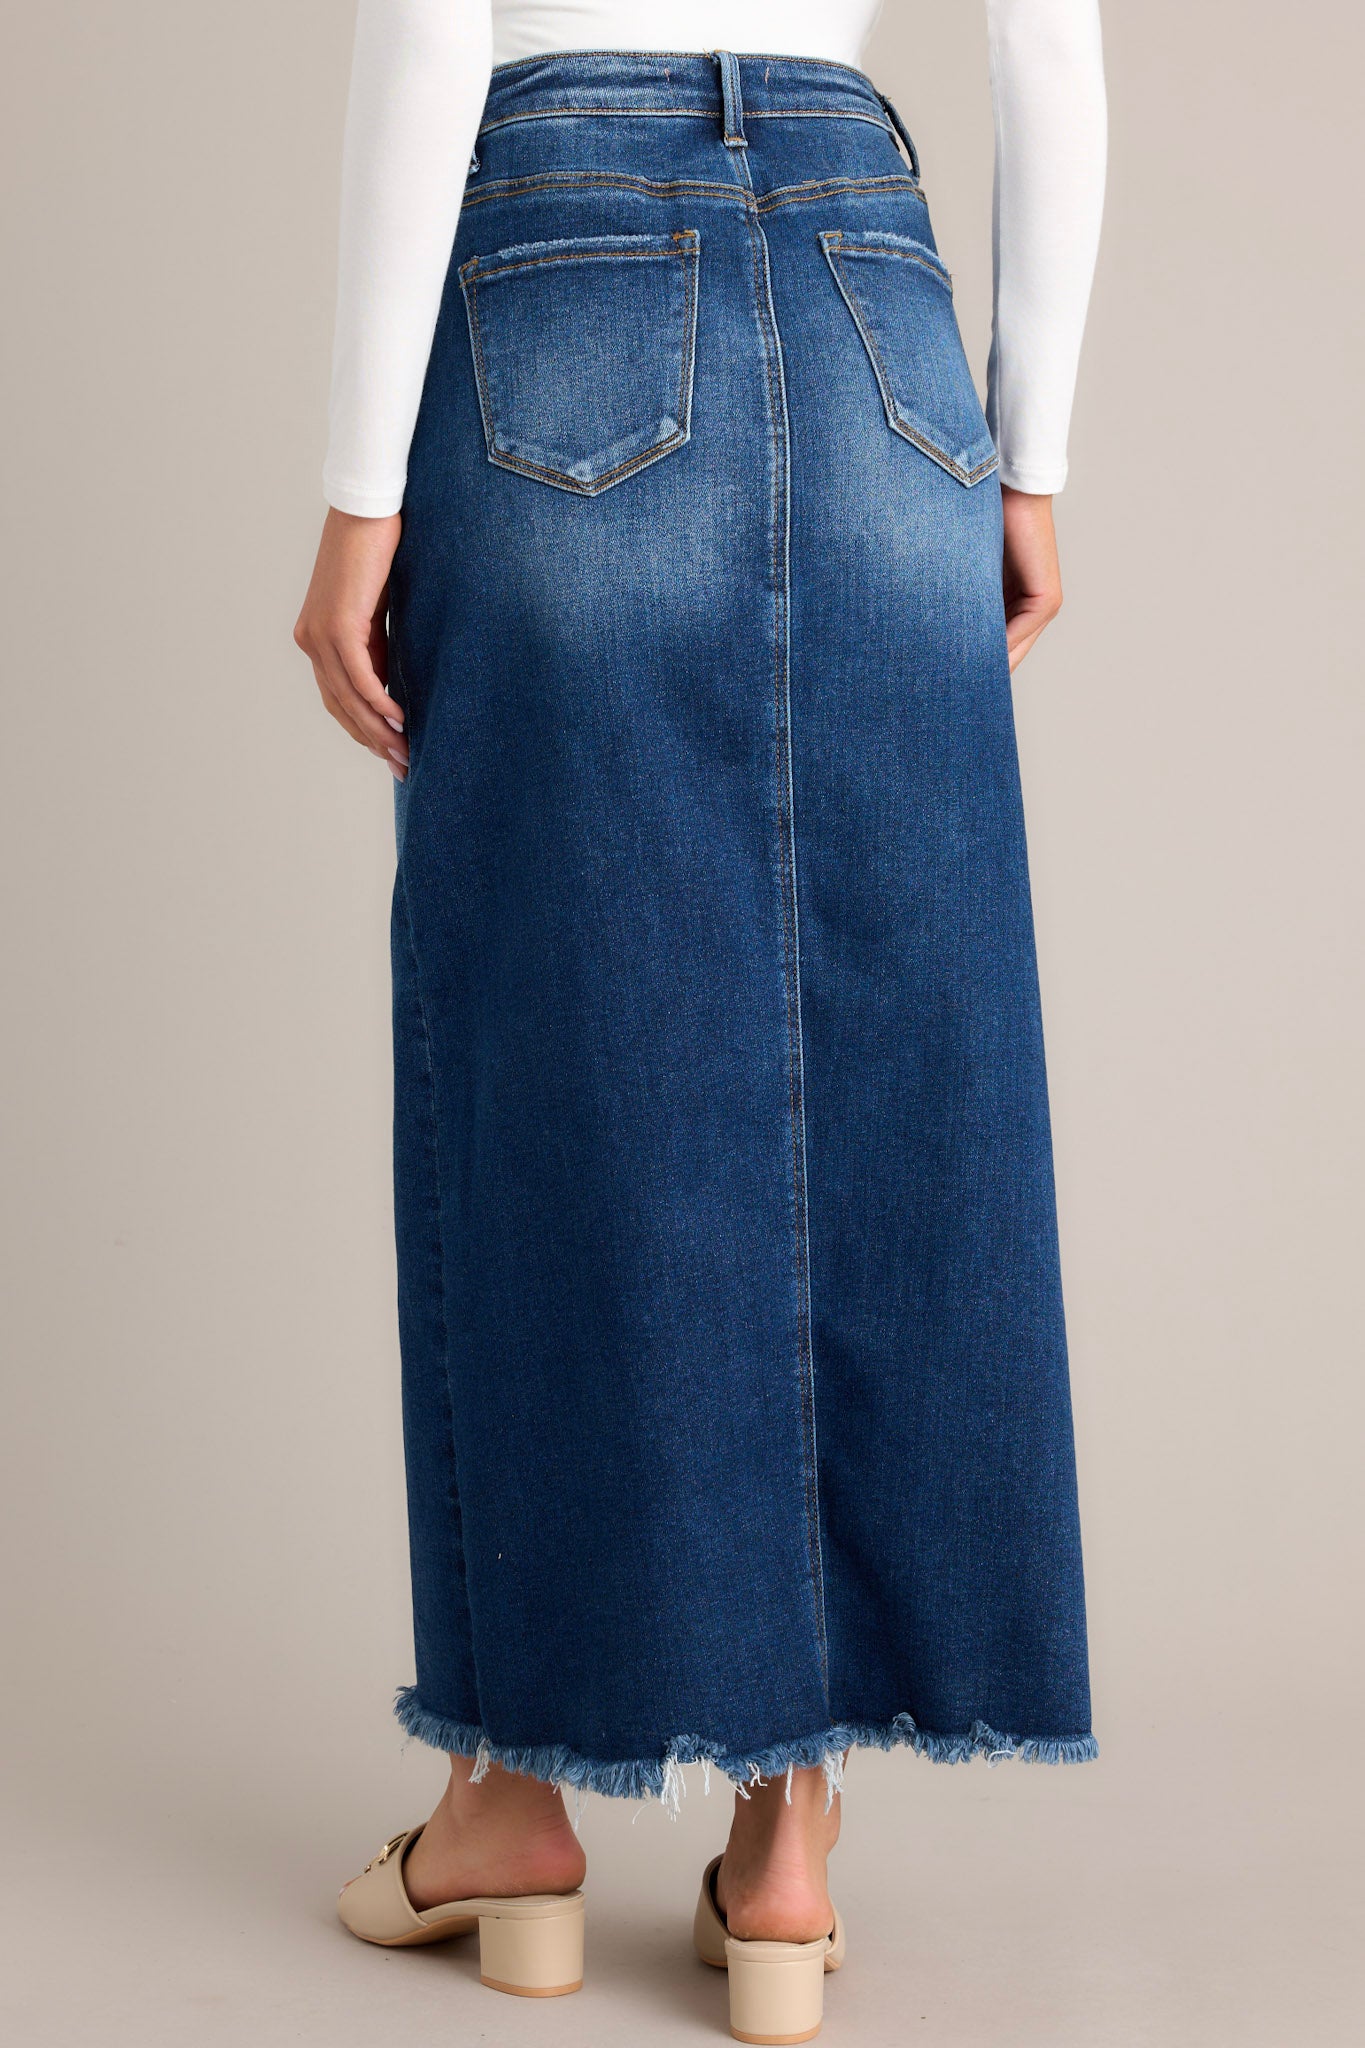 Back view of this dark wash denim midi skirt features a high waisted design, belt loops, a zipper and button closure, functional pockets, a 15" slit up the center, and raw hem detailing.